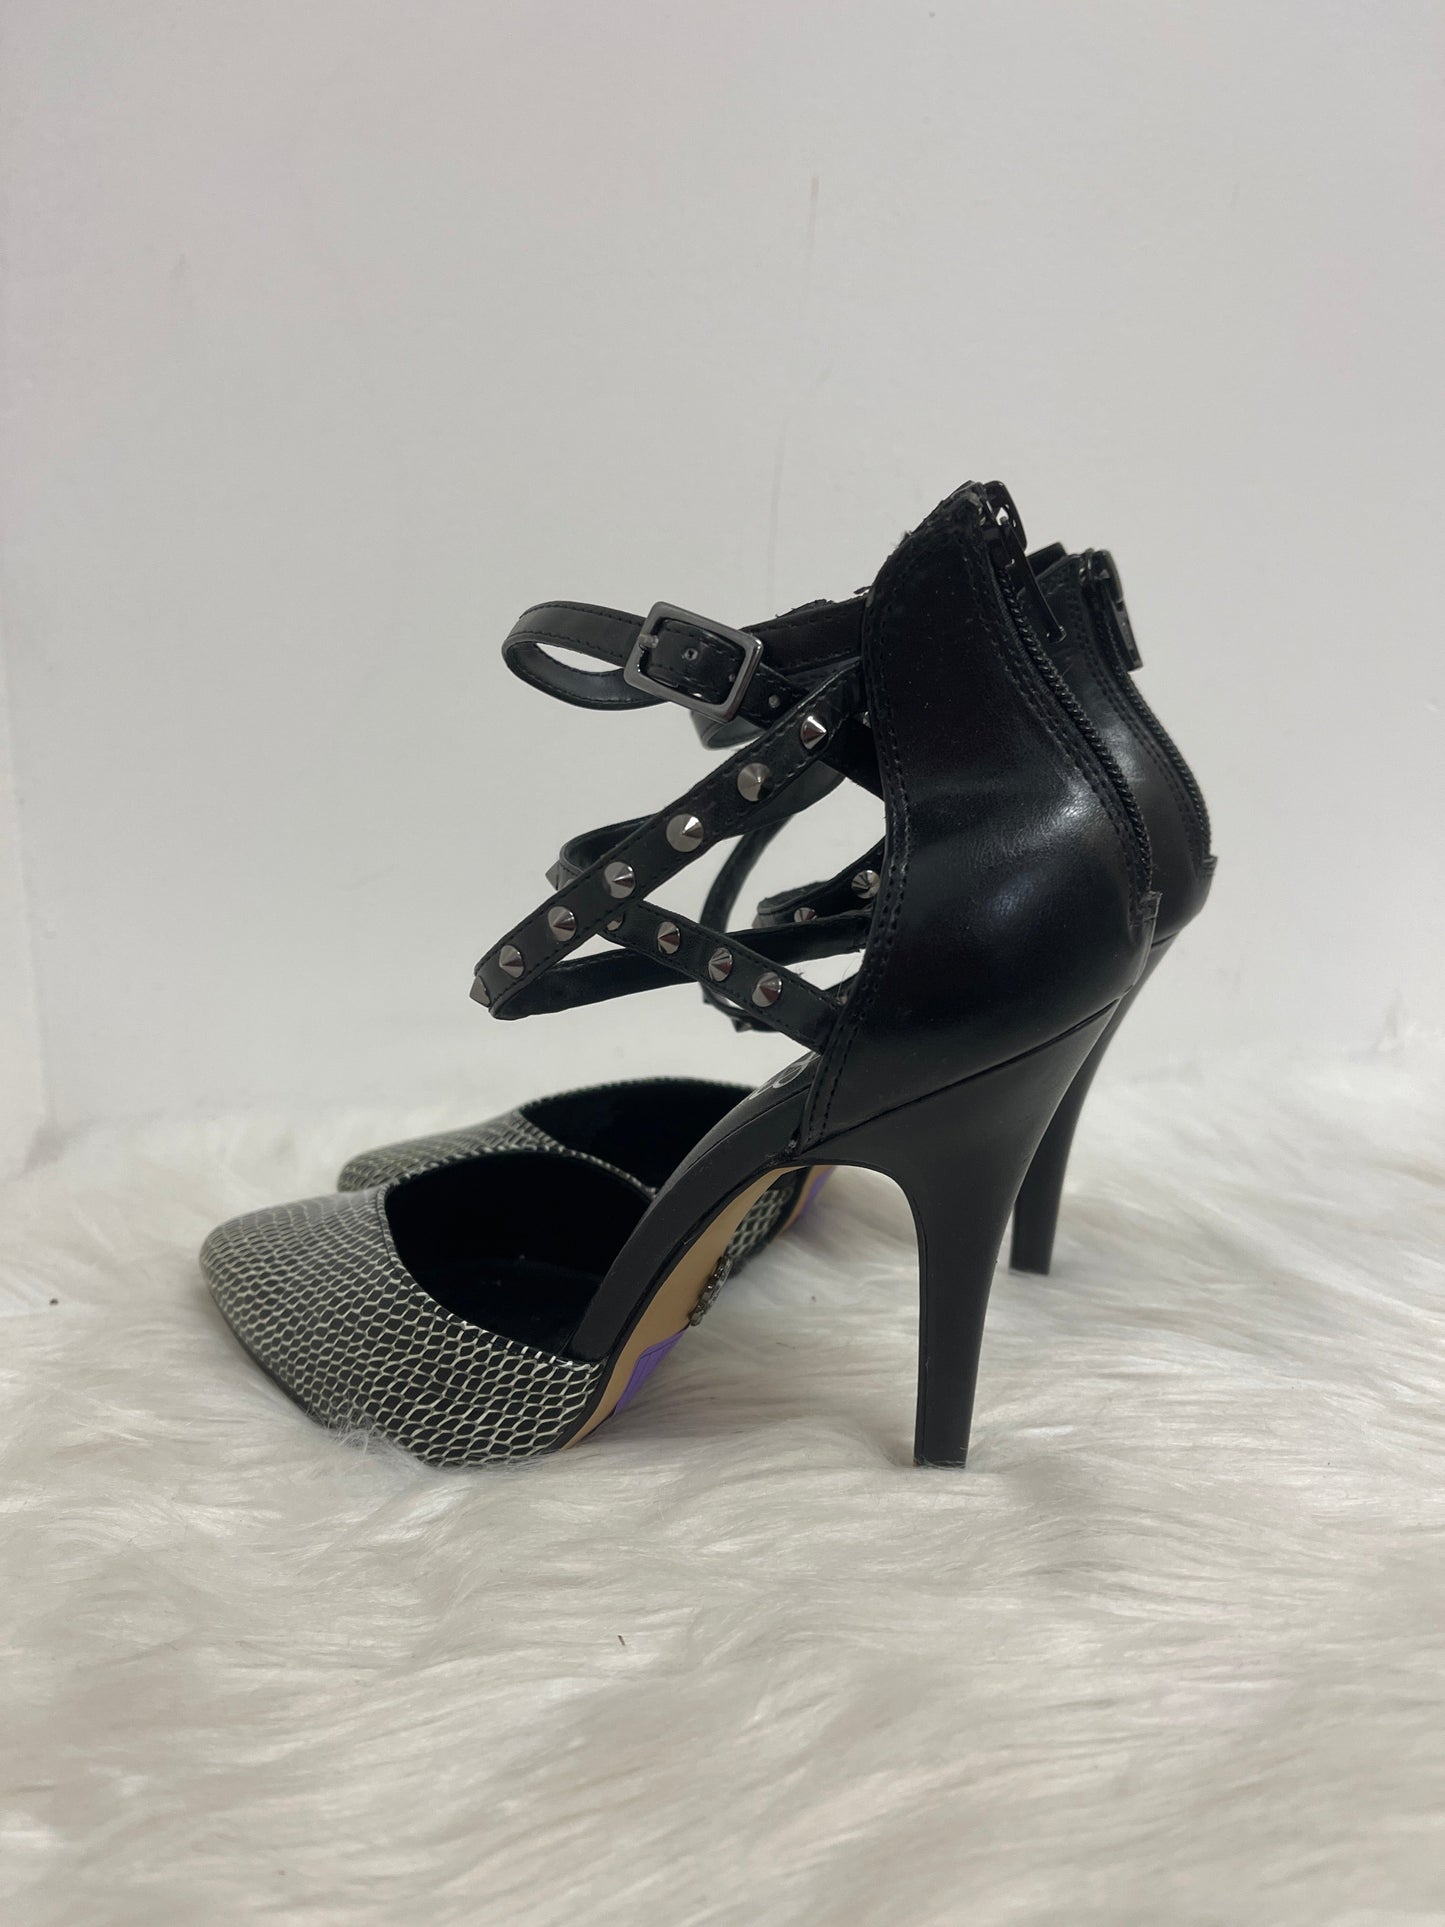 Shoes Heels Stiletto By Rock And Republic  Size: 7.5